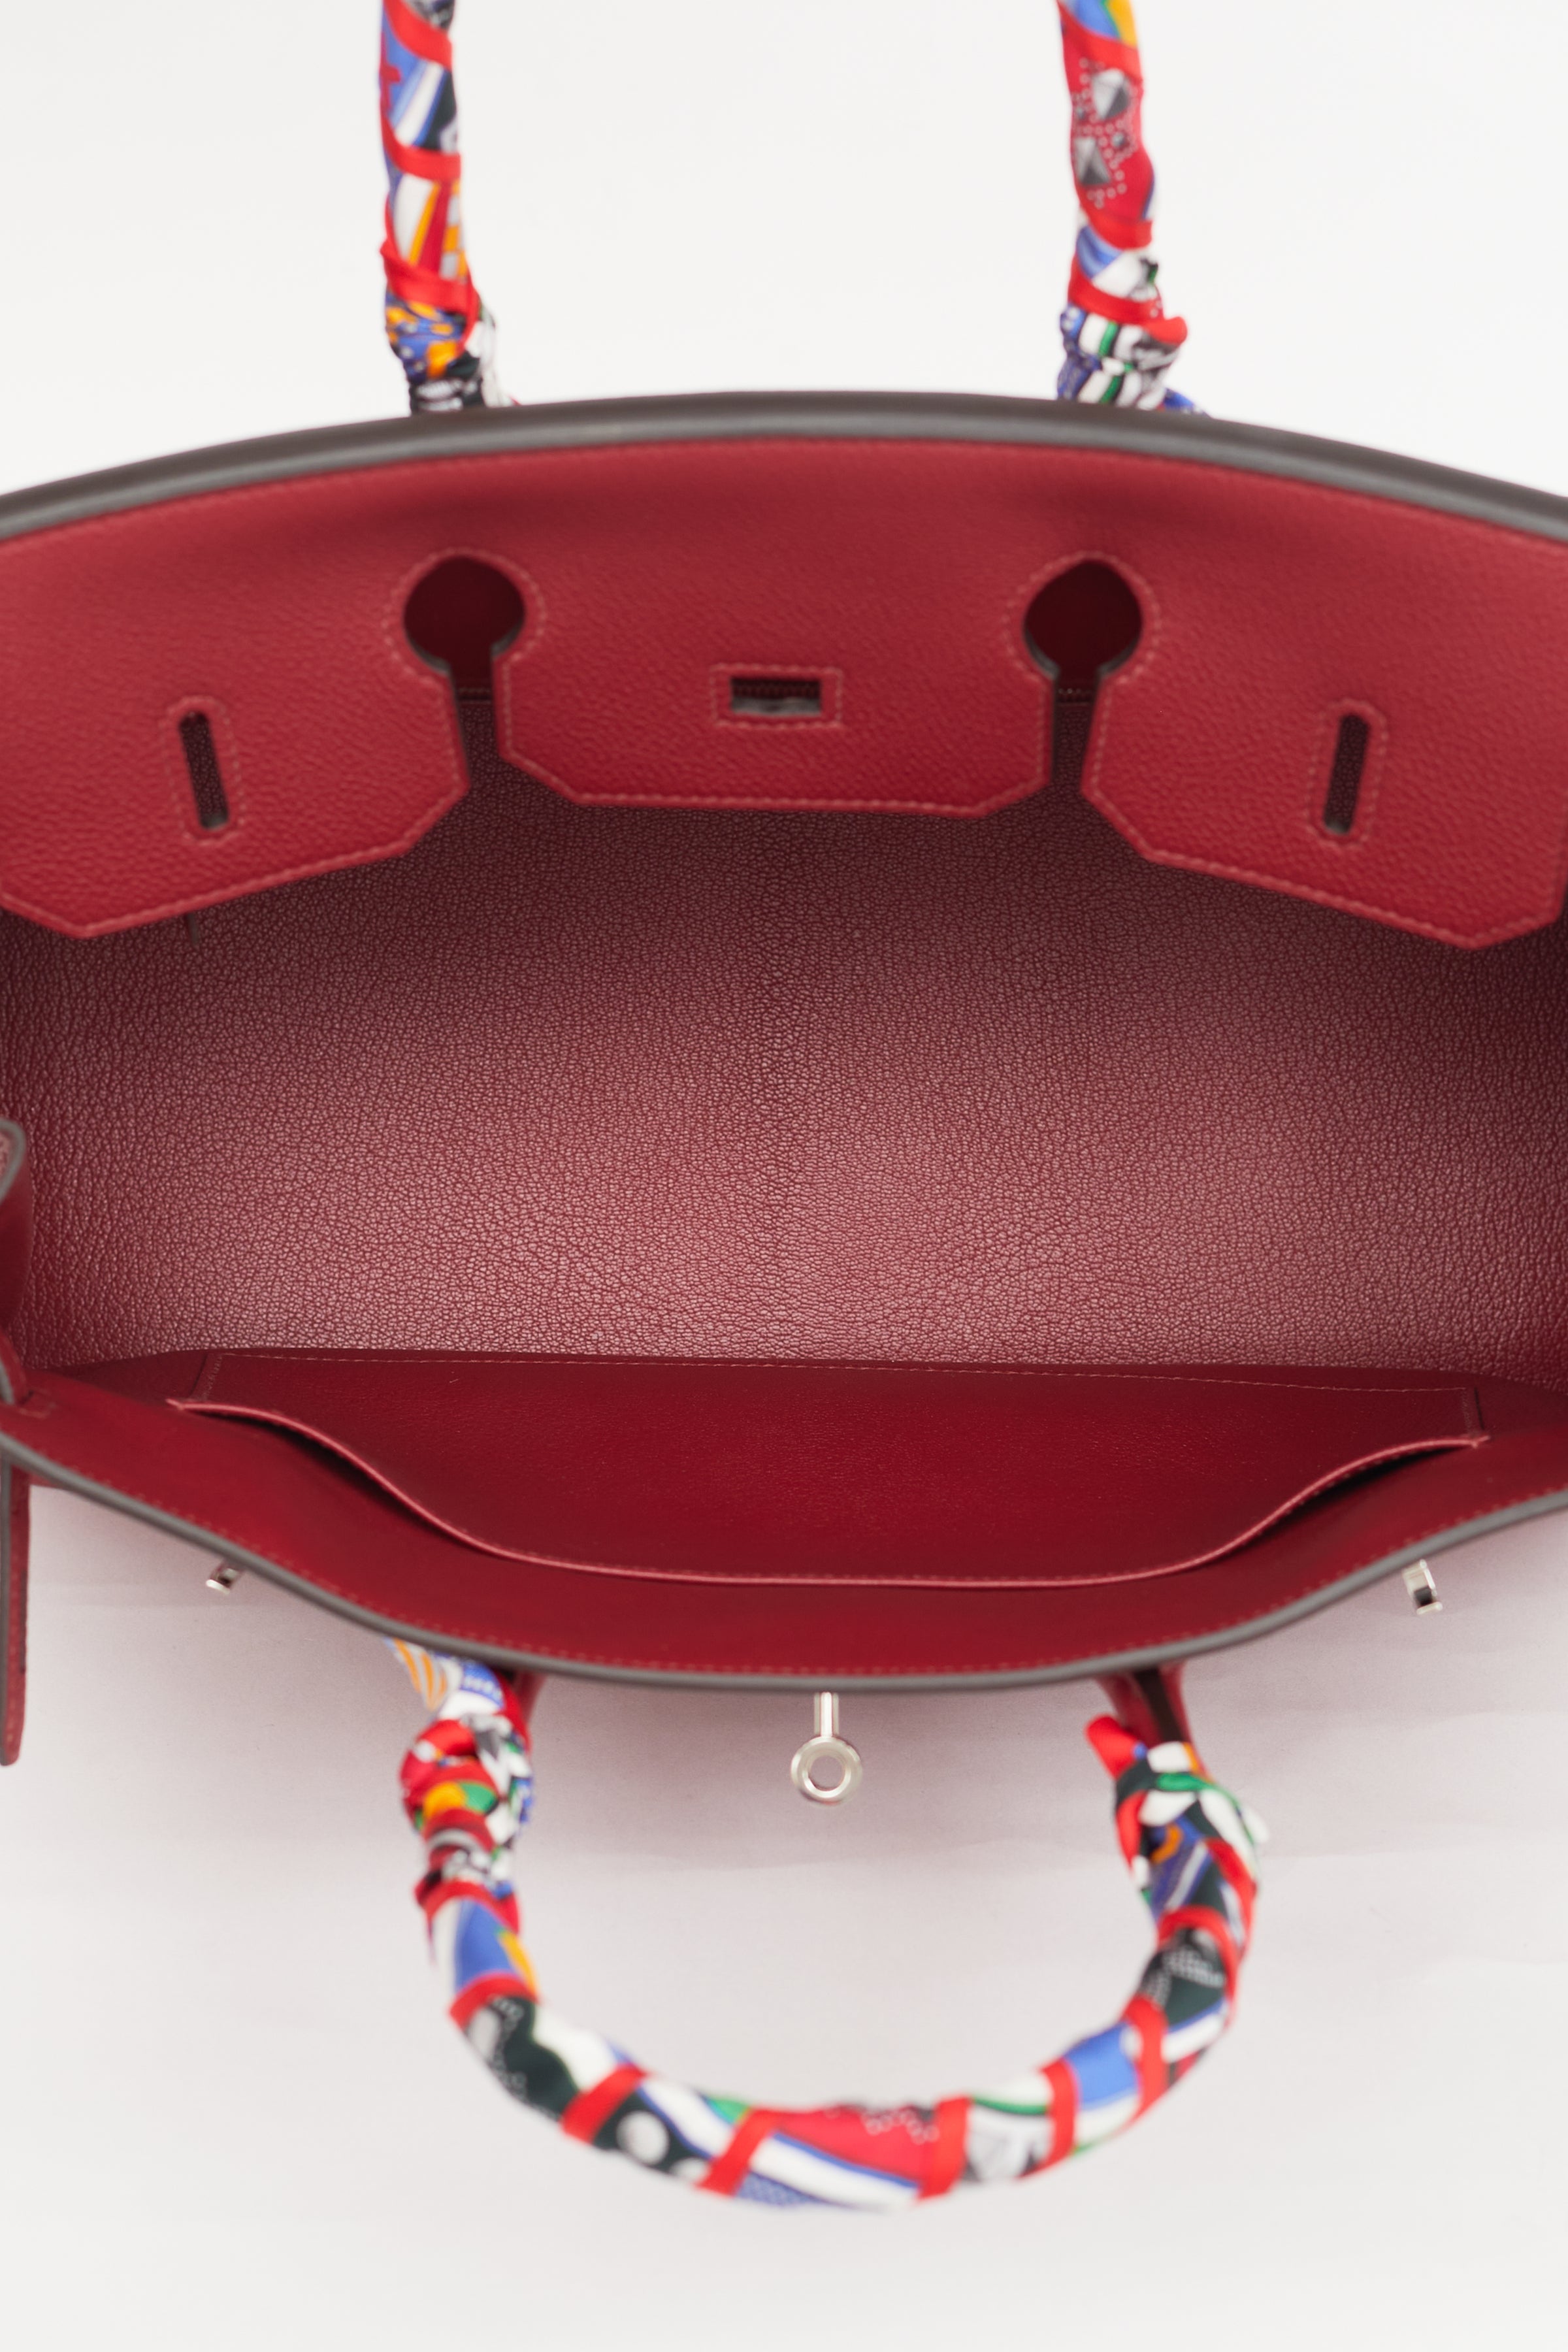 Meet the Rouge Grenat Birkin! This iconic bag is in the color red